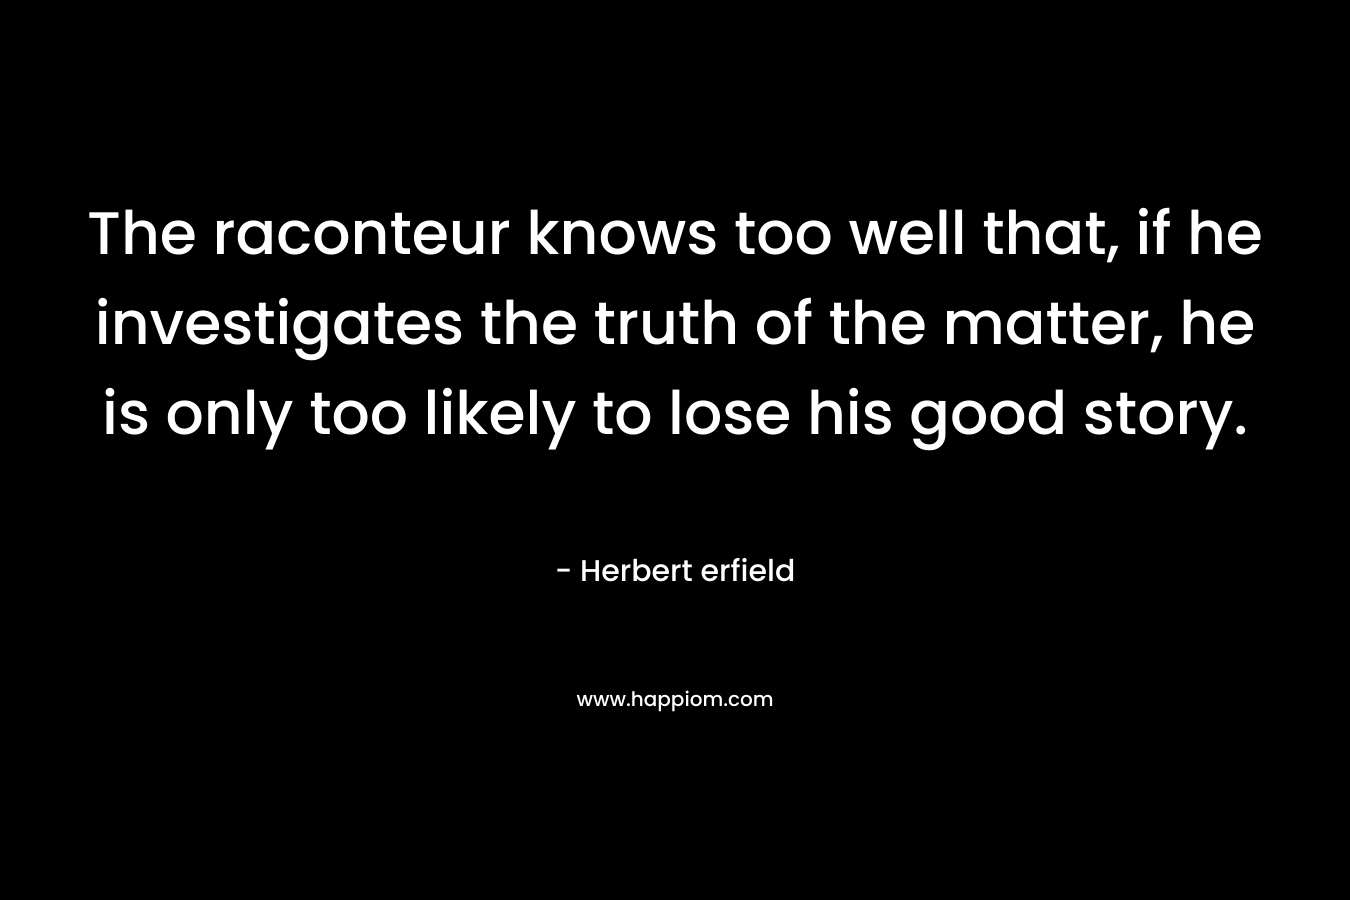 The raconteur knows too well that, if he investigates the truth of the matter, he is only too likely to lose his good story.